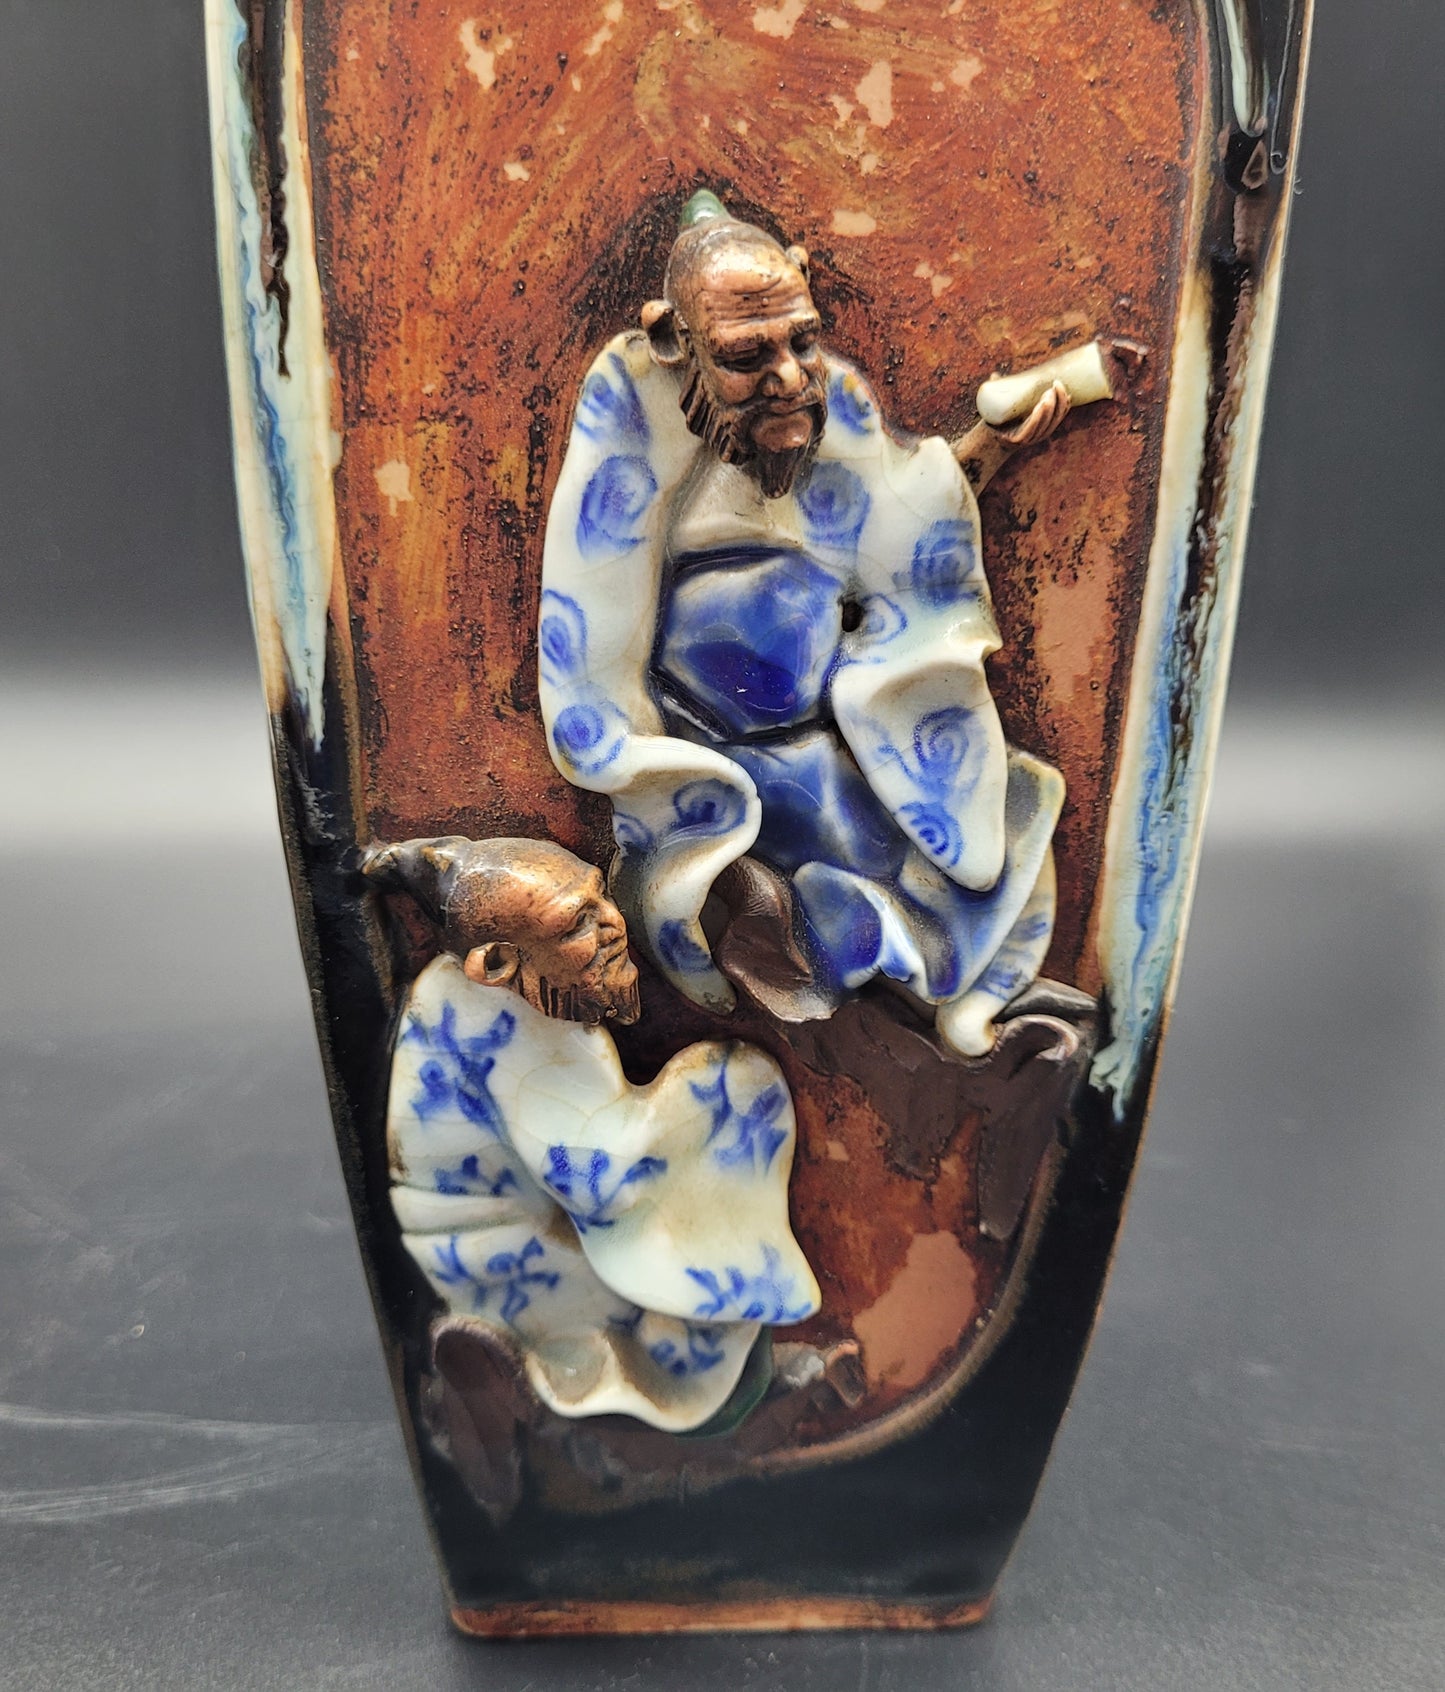 Highly Detailed Japanese Meiji Sumida Gawa Pottery Vases Signed By The Artist   Late 19th Century Meiji period  ANTIQUES ONLINE 